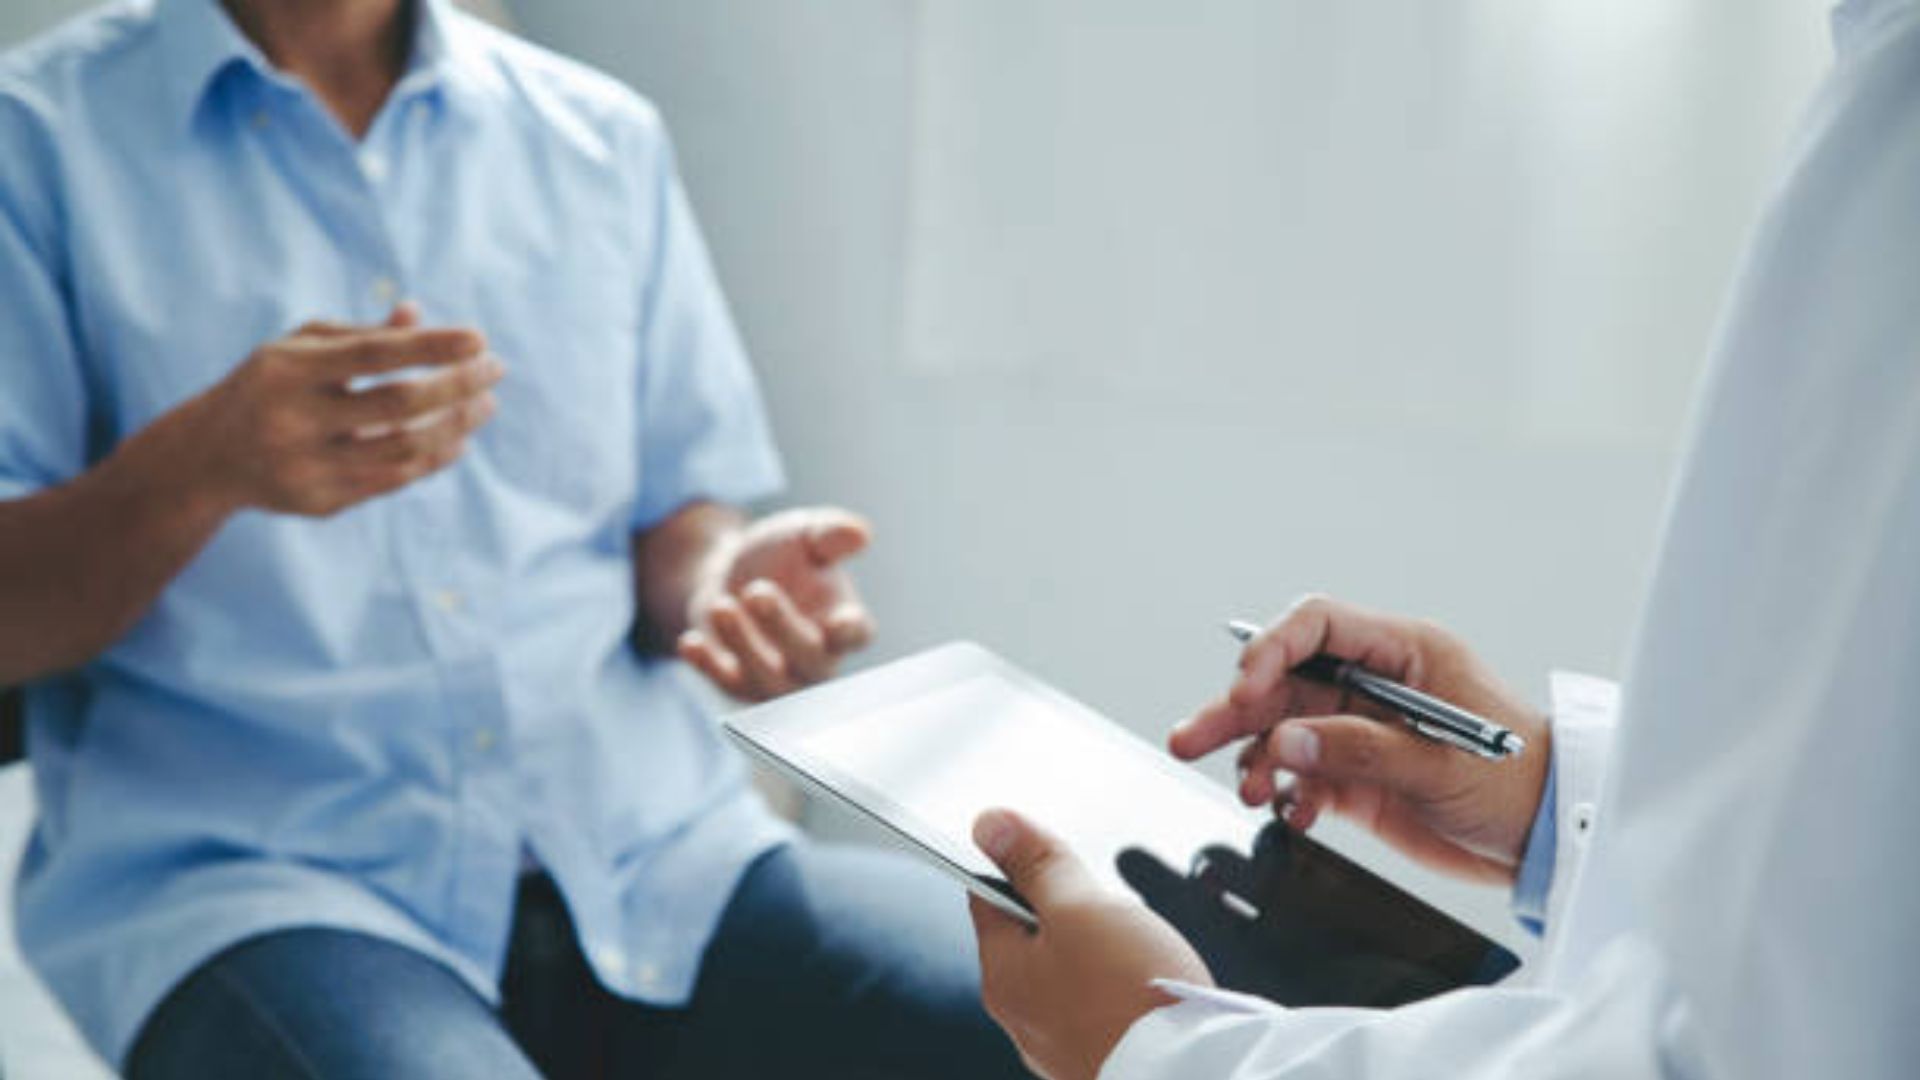 How To Schedule Patient Appointments Effectively?